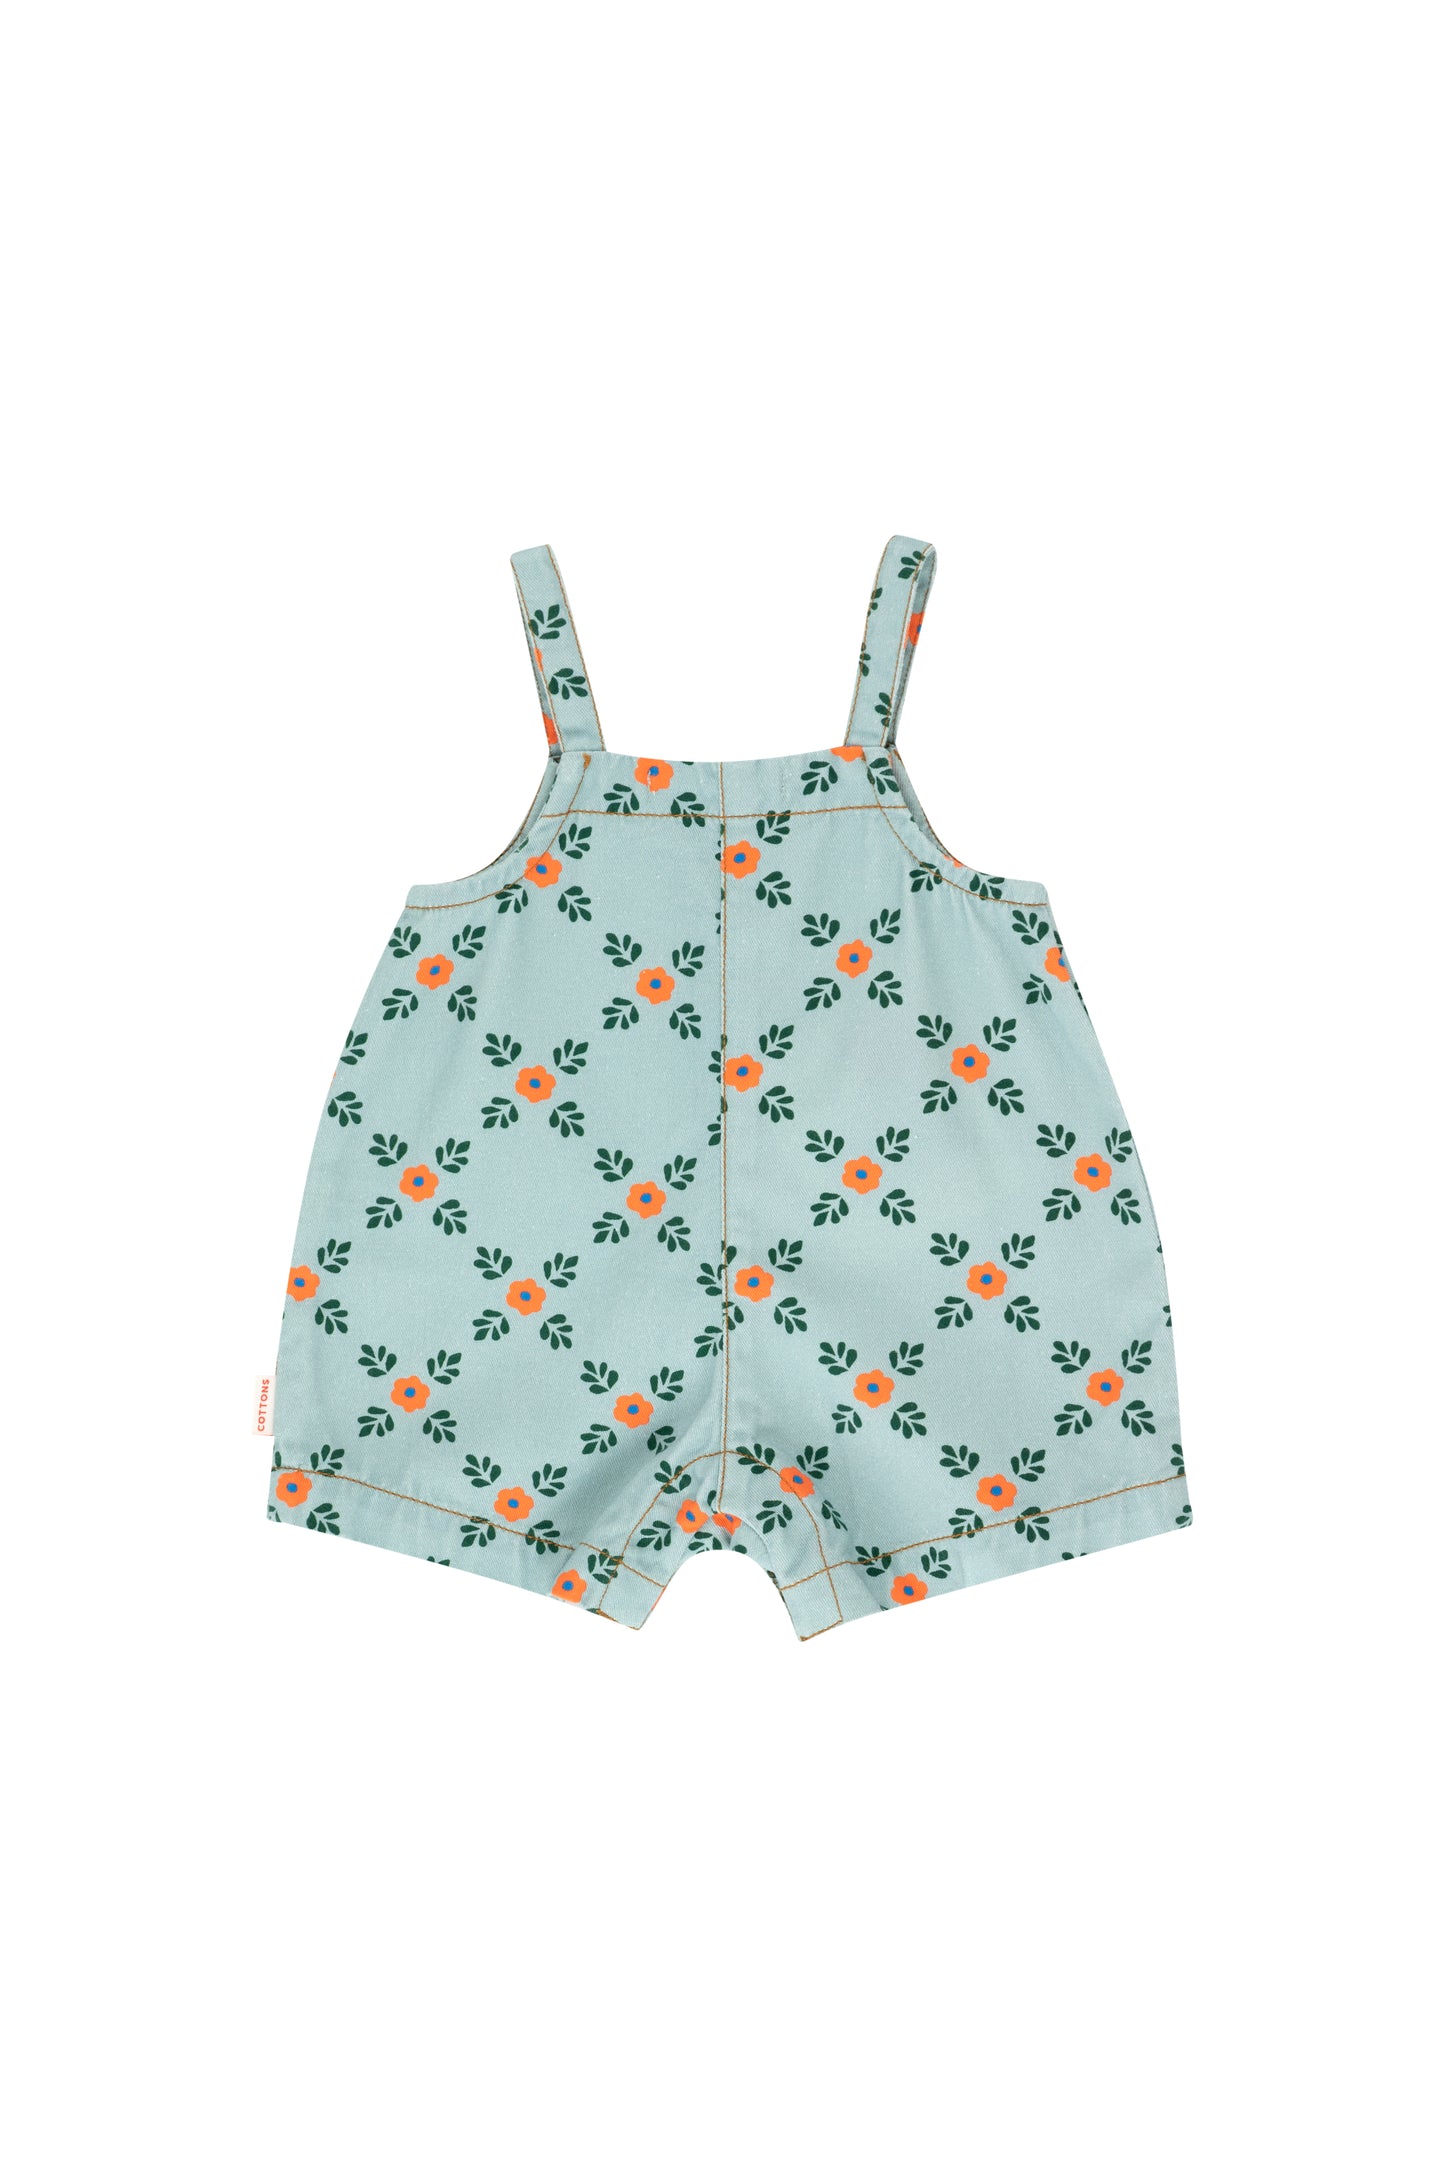 Folklore baby dungaree